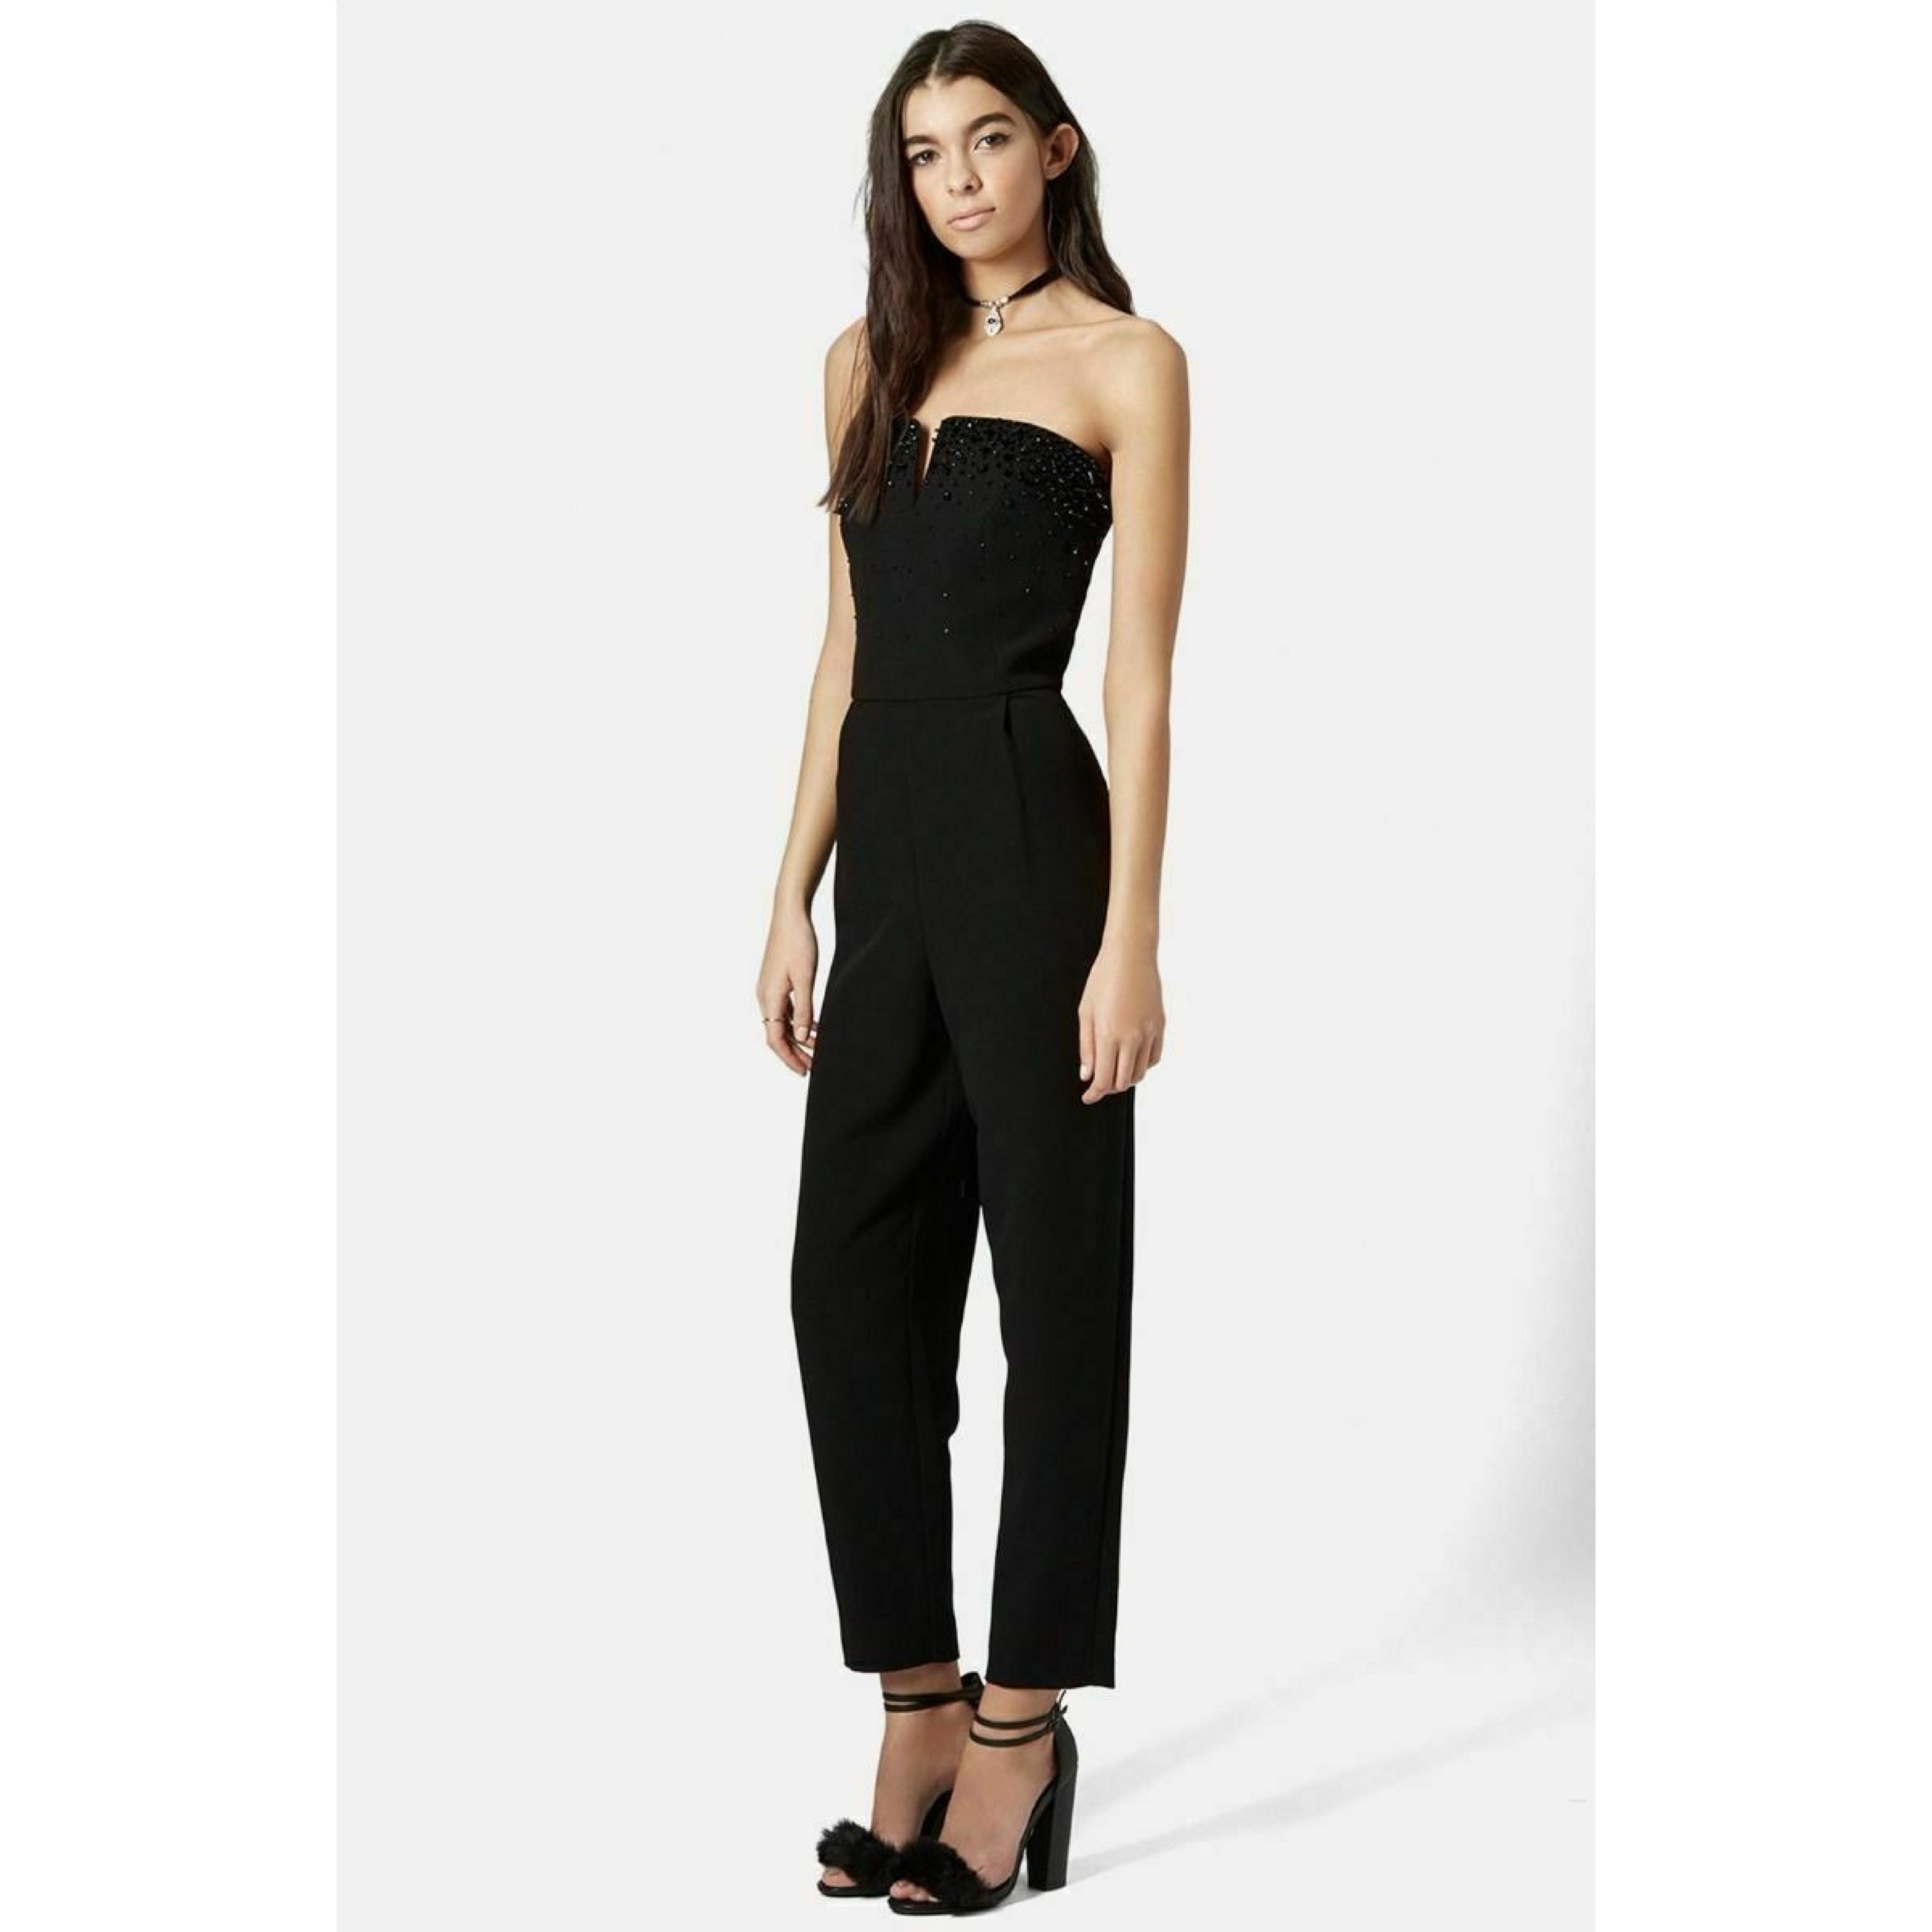 Topshop black strapless jumpsuit, size 8, LIKE NEW!